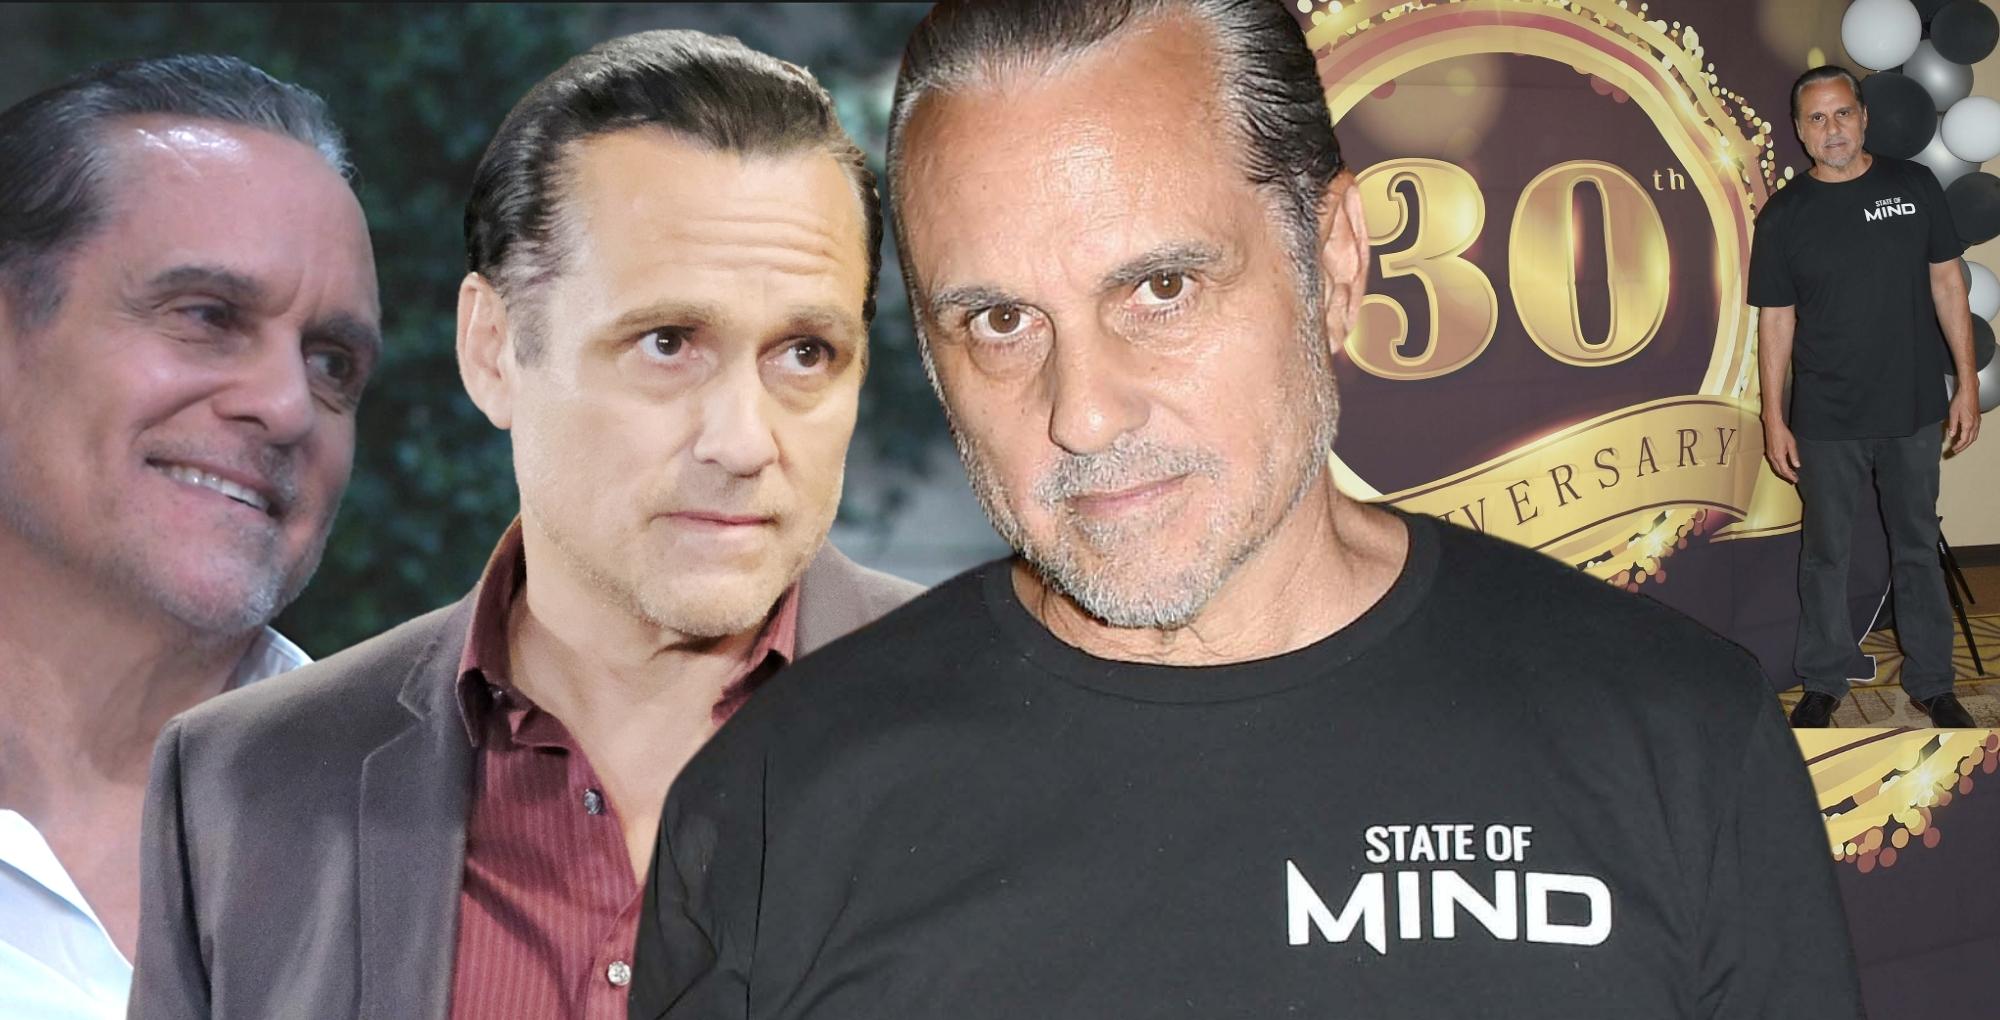 maurice benard has played sonny for 30 years on general hospital.